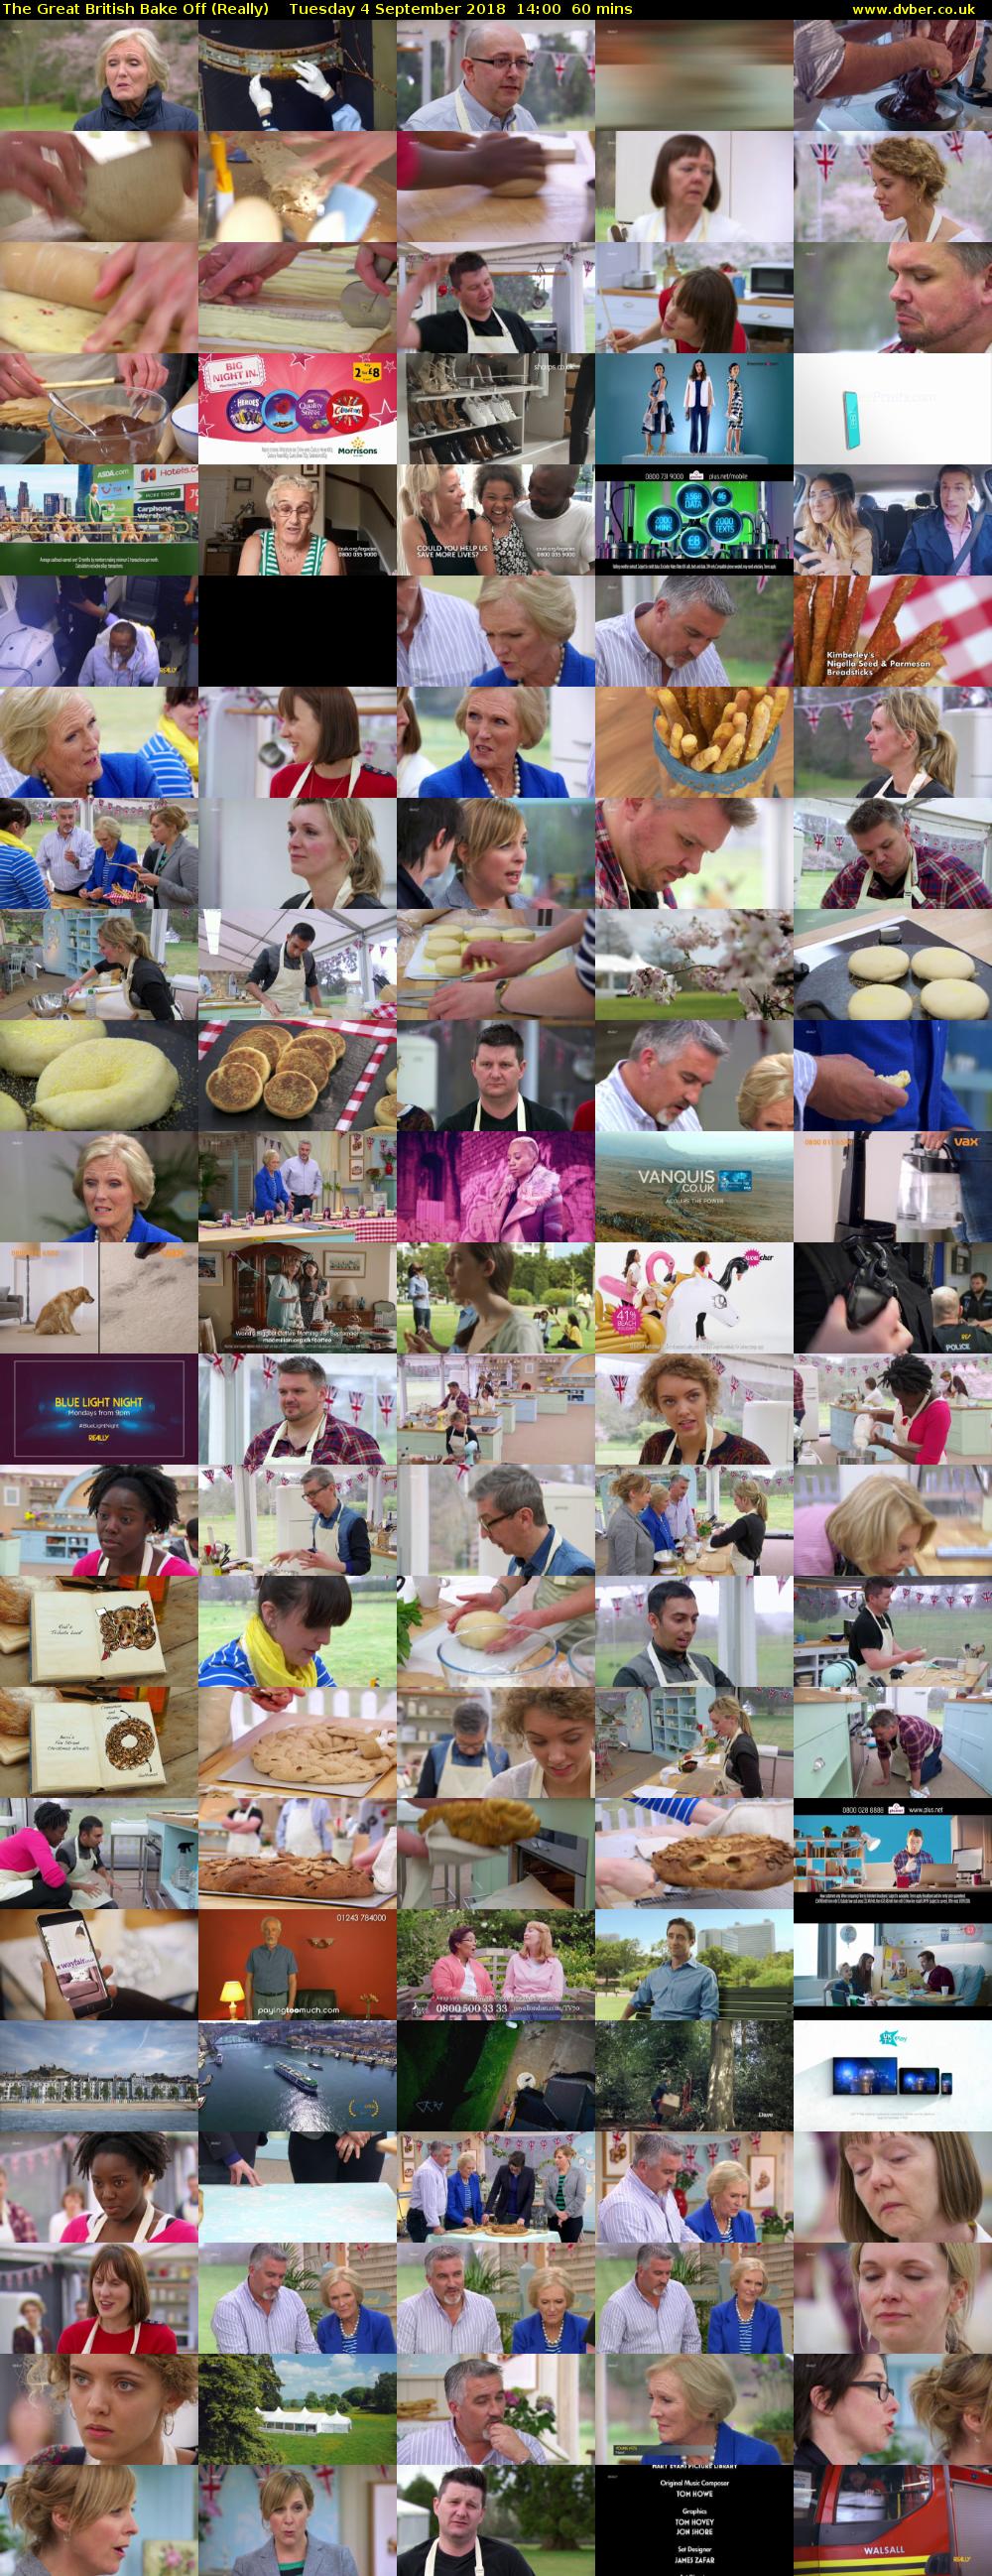 The Great British Bake Off (Really) Tuesday 4 September 2018 14:00 - 15:00